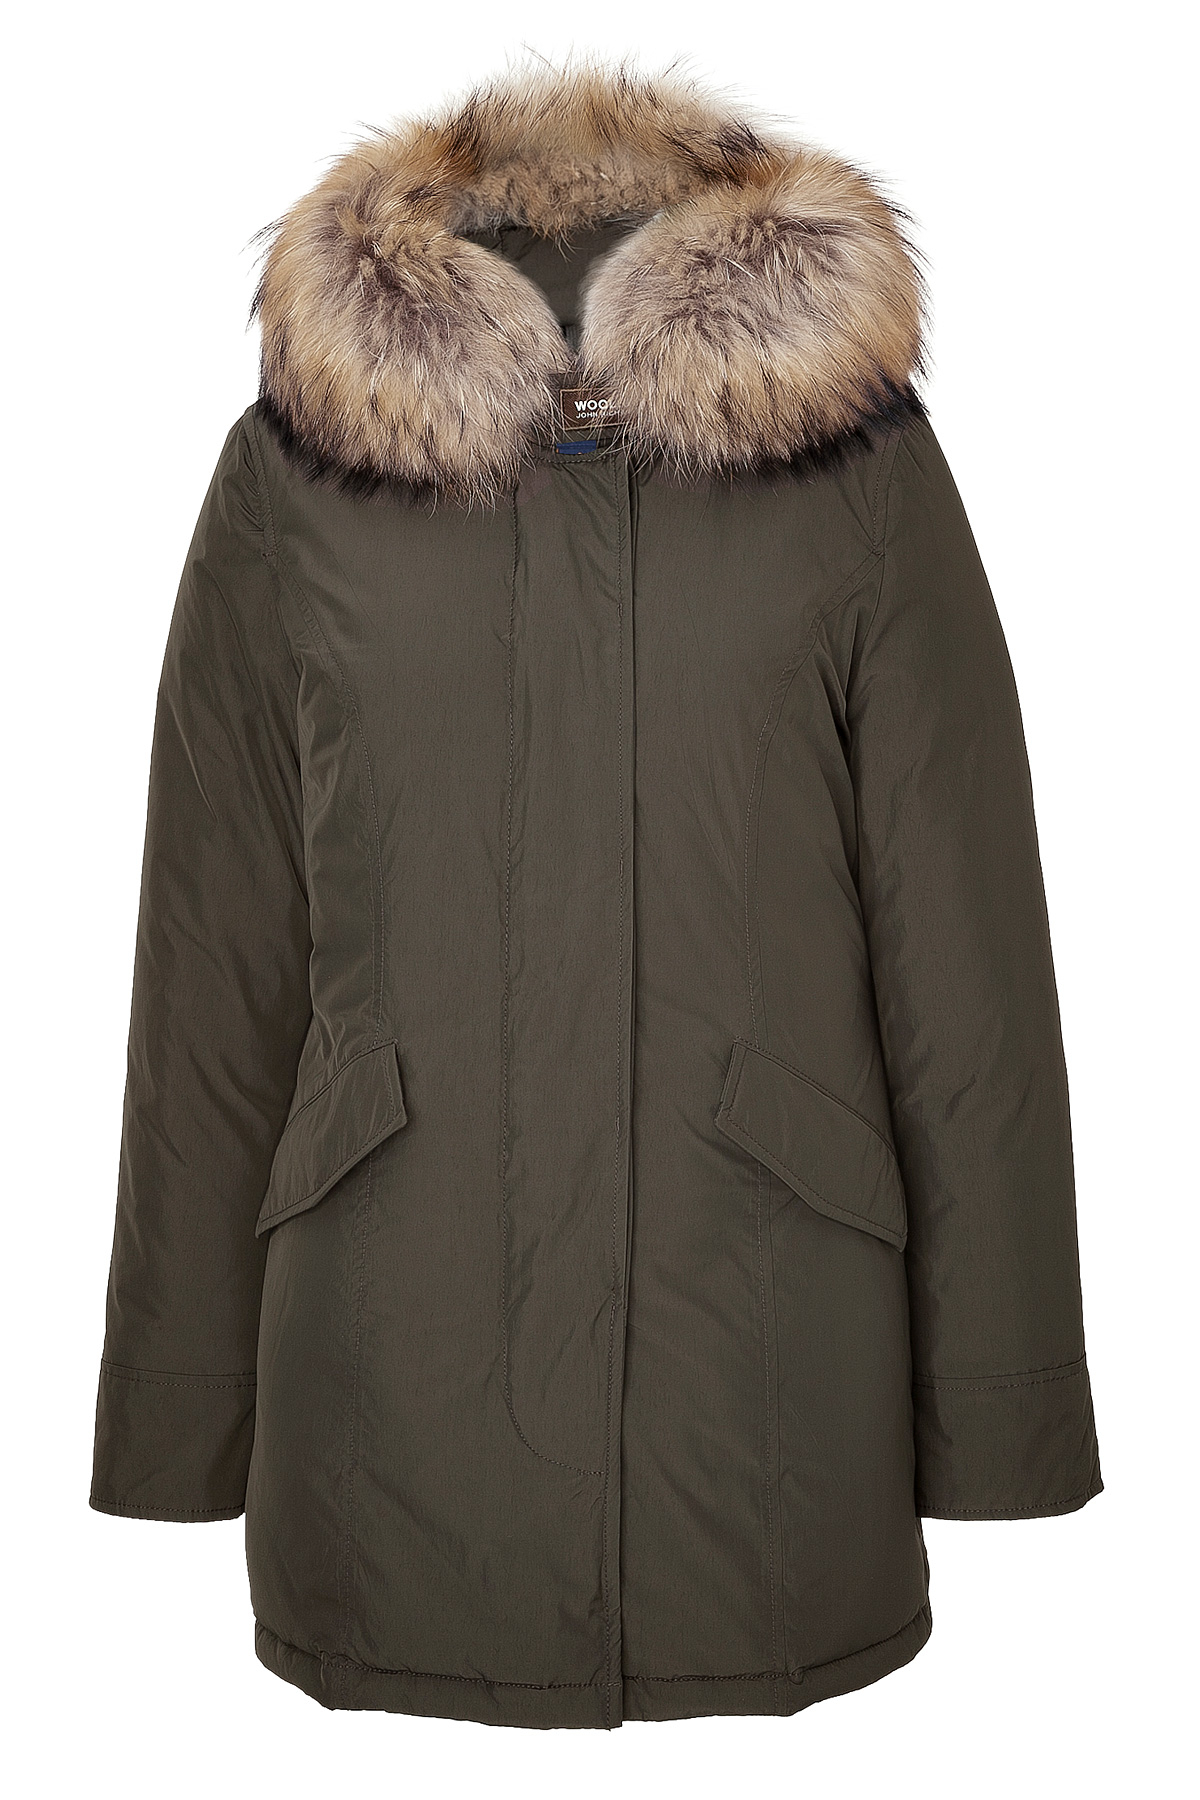 Lyst - Woolrich Womens Luxury Arctic Parka With Fur Trim in Green